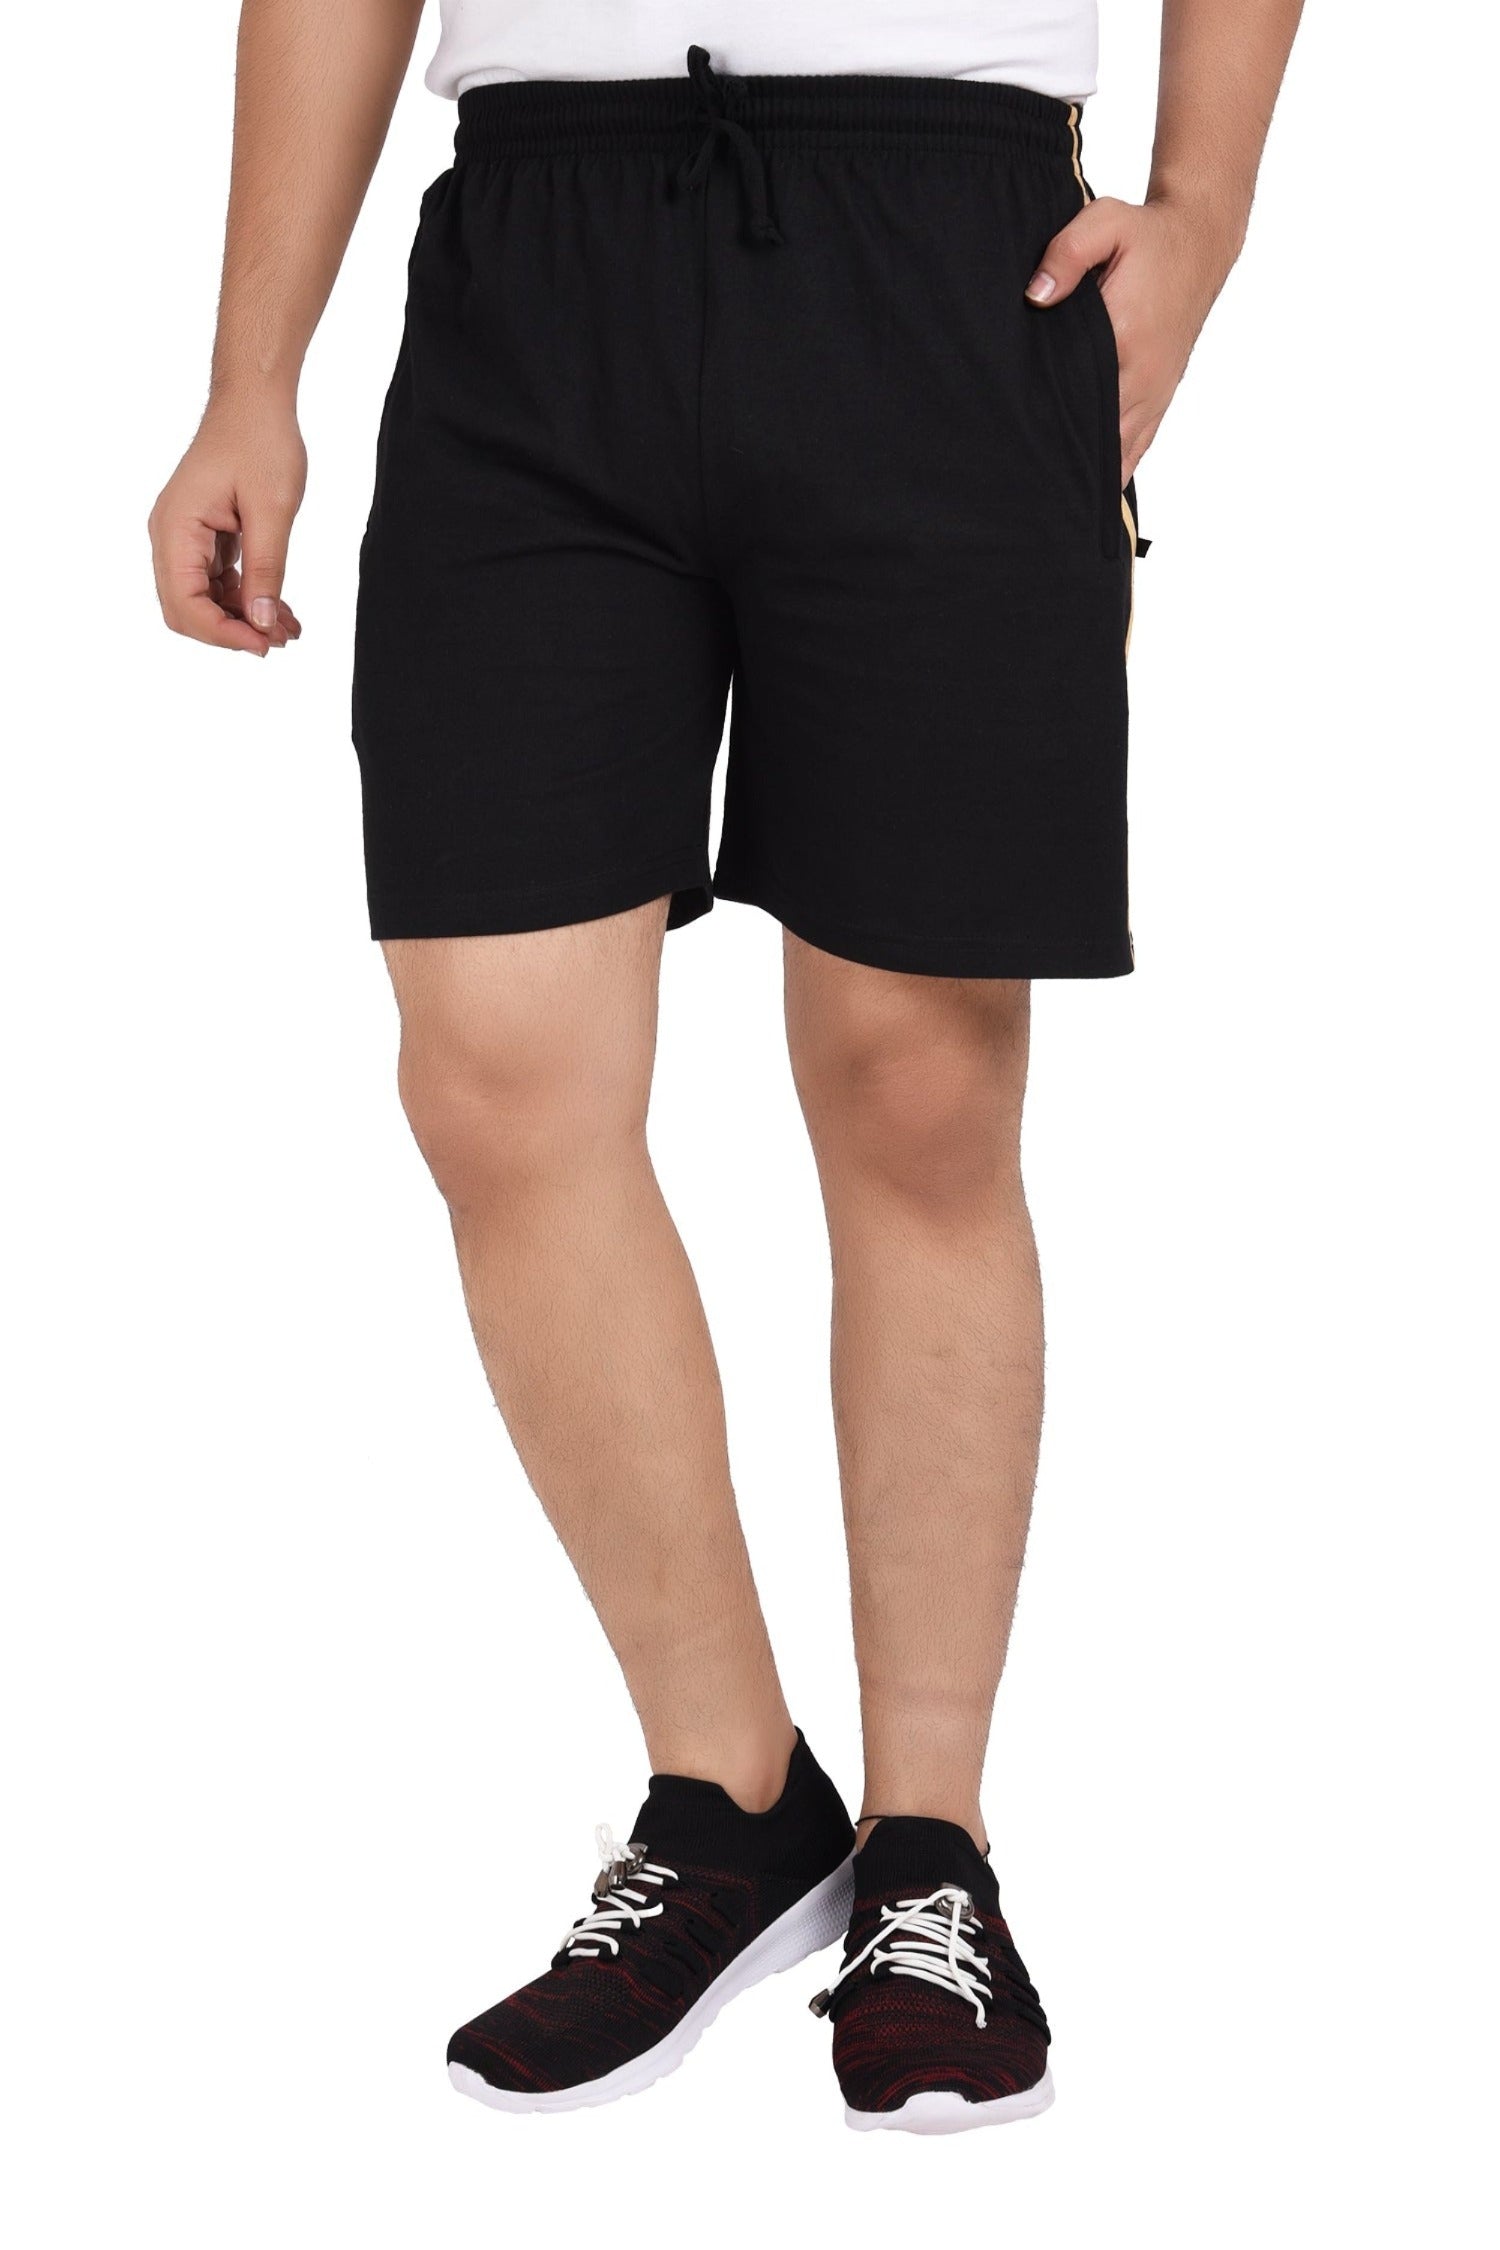 Amoystyle Mens Relaxed Fit Long Cargo Shorts Capri Pants Black US 32 Asian  L  Amazonin Clothing  Accessories